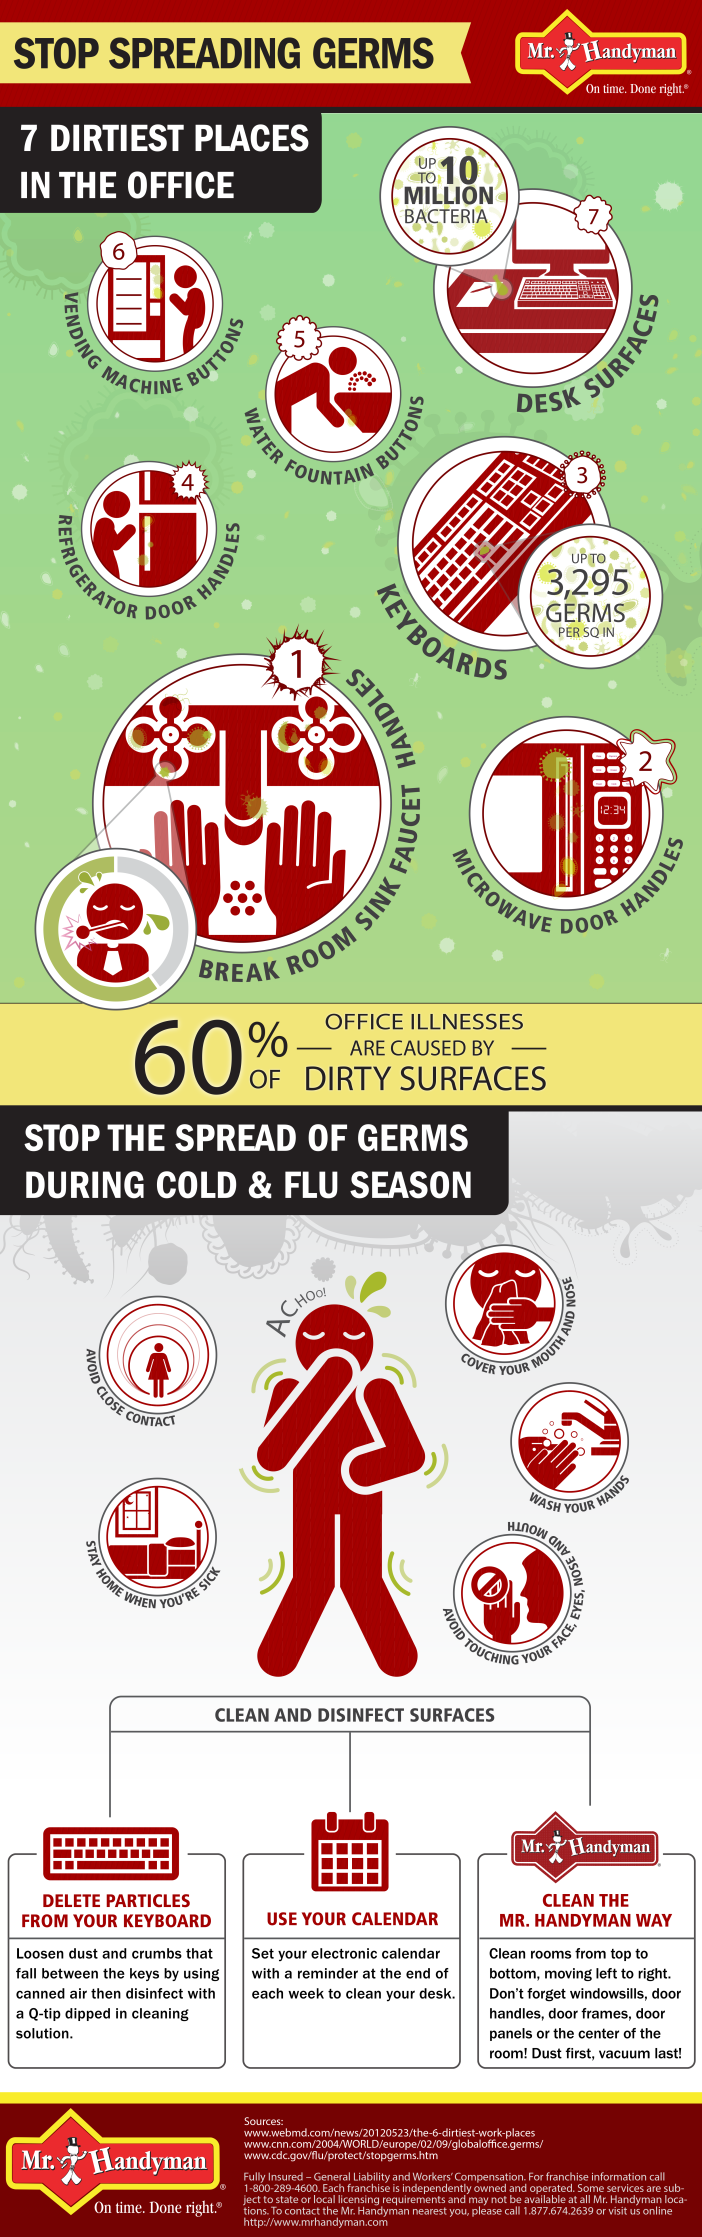 Germs - 7 Dirtiest Places in the Office infographic